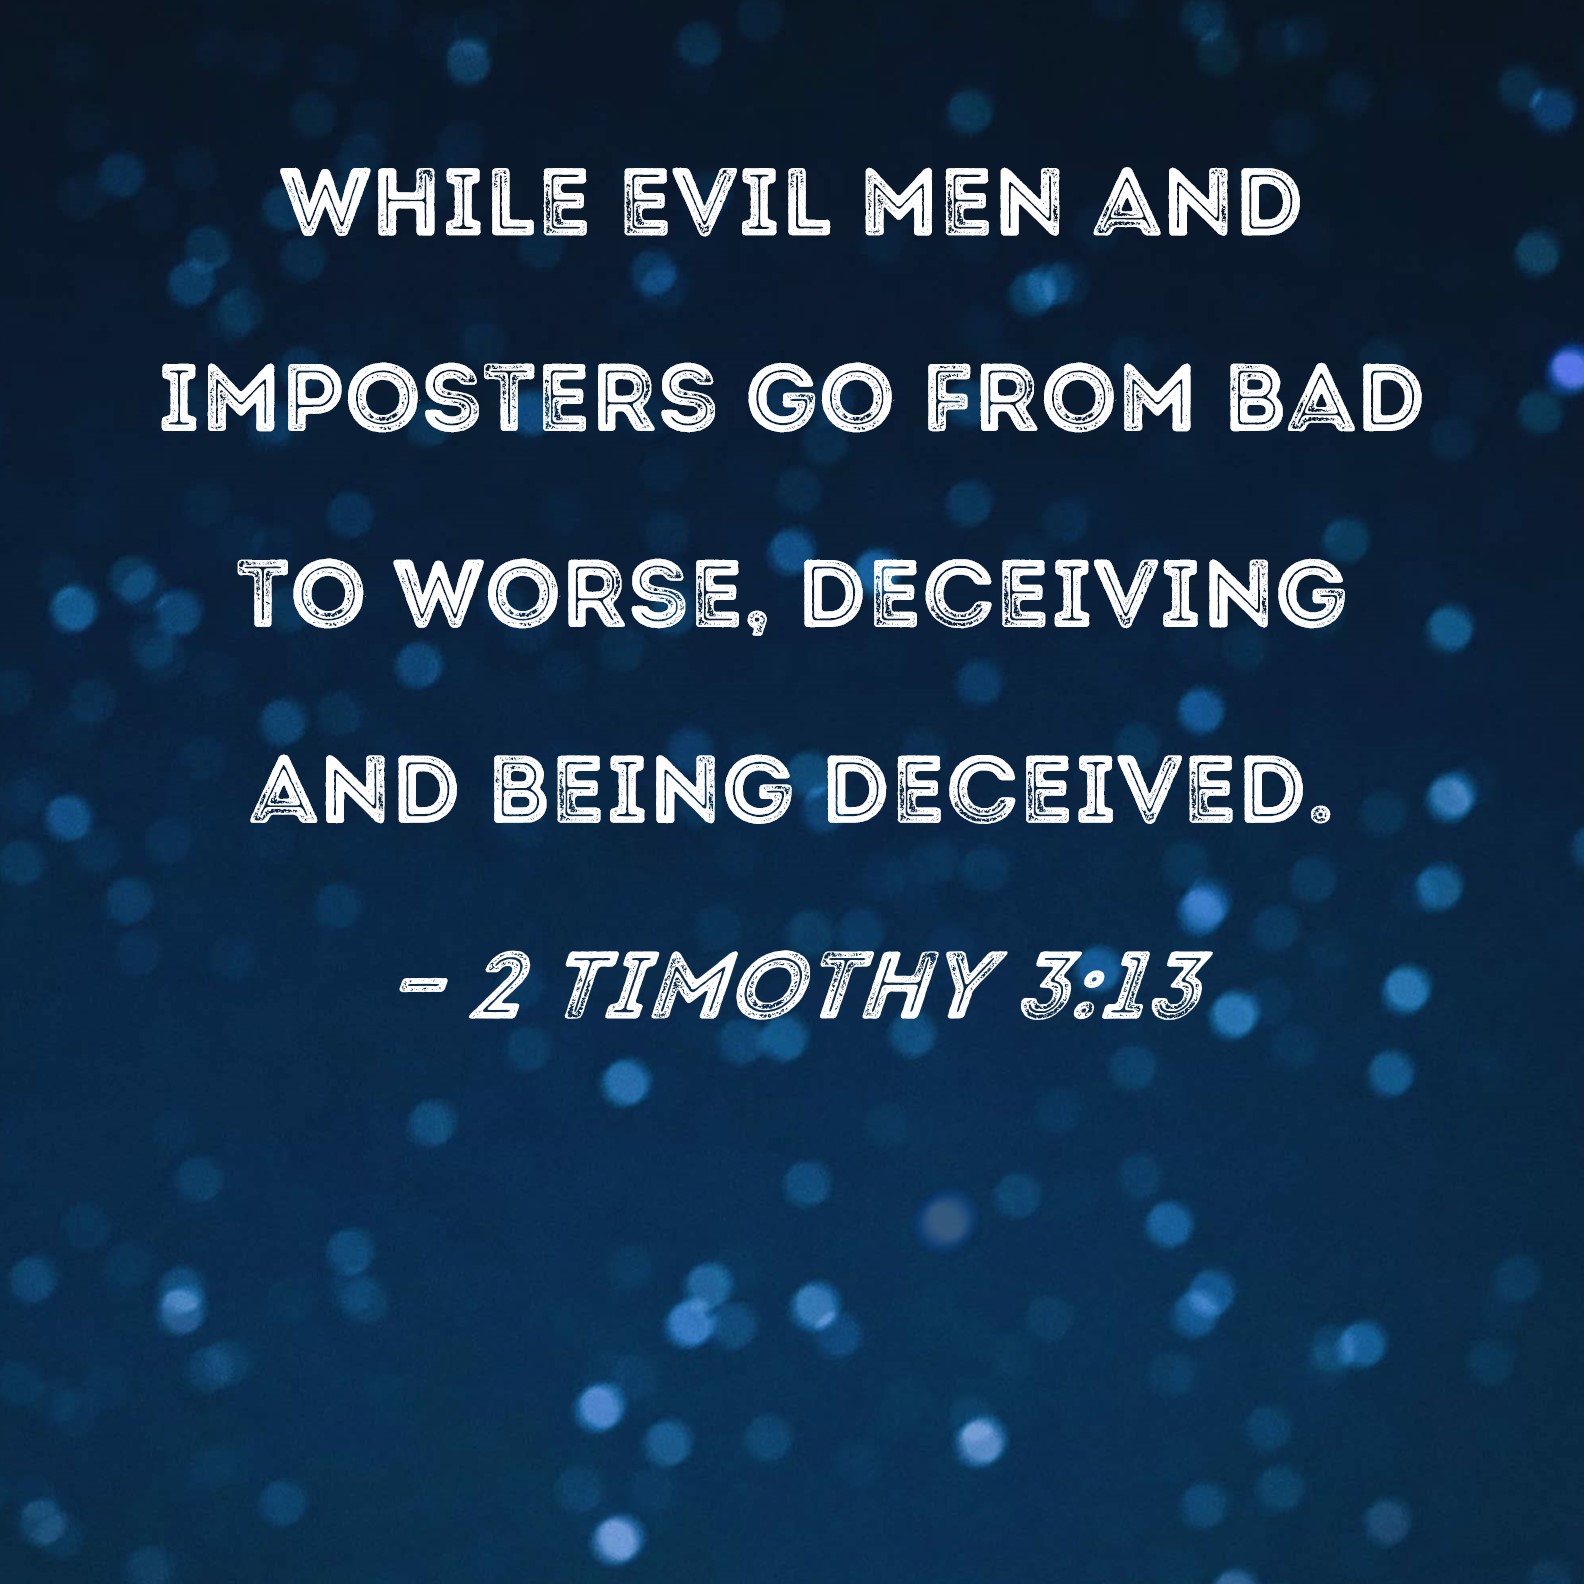 usund granske Barnlig 2 Timothy 3:13 while evil men and imposters go from bad to worse, deceiving  and being deceived.